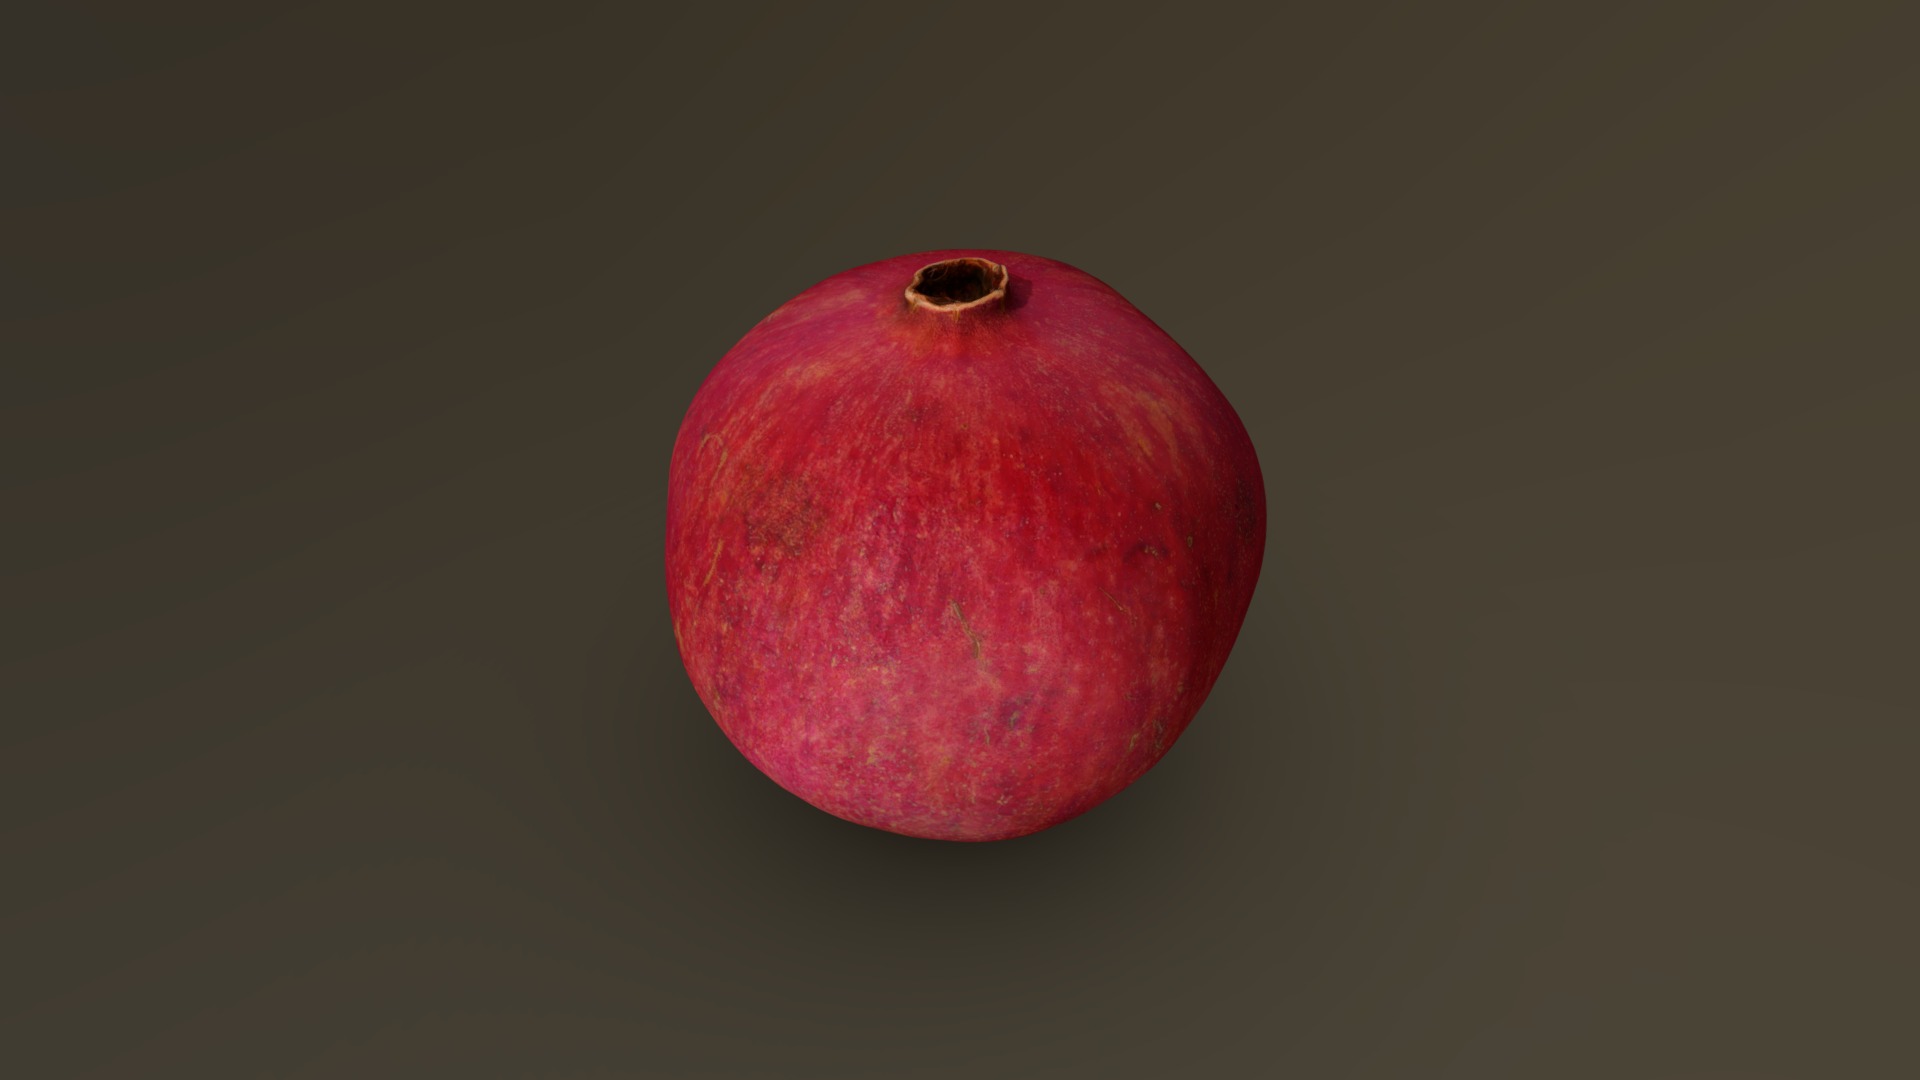 3D model Pomegranate 01 - This is a 3D model of the Pomegranate 01. The 3D model is about a red apple with a black background.